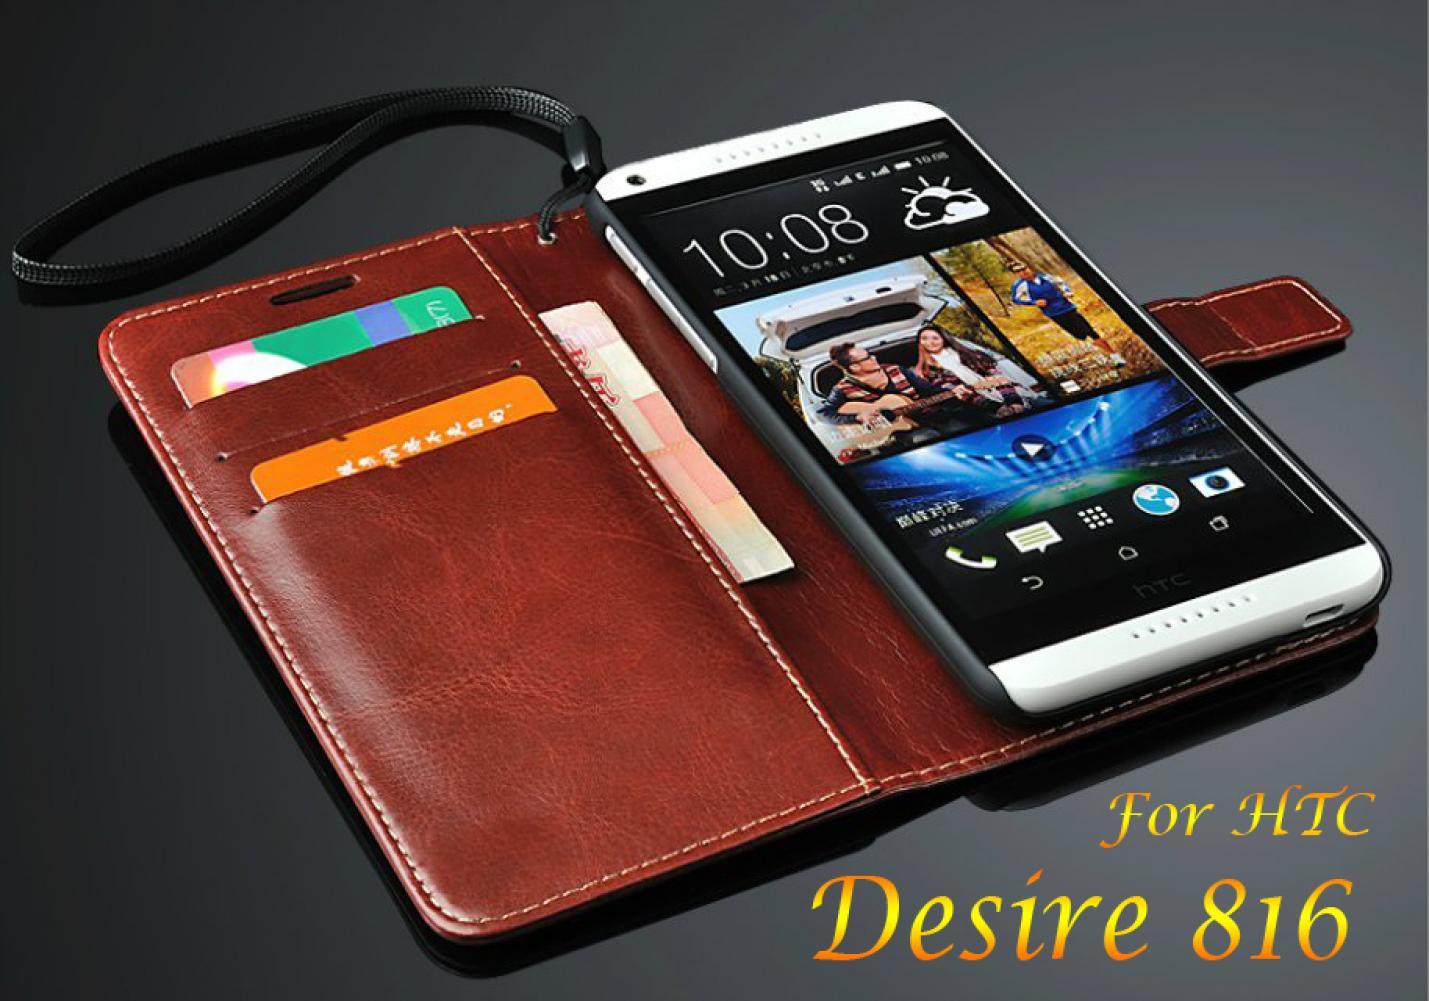 Hot Selling Luxury Retro PU Leather Flip Case for HTC Desire 816 Phone Bag Wallet Design with Card Holder Stand Items,5 Colors 